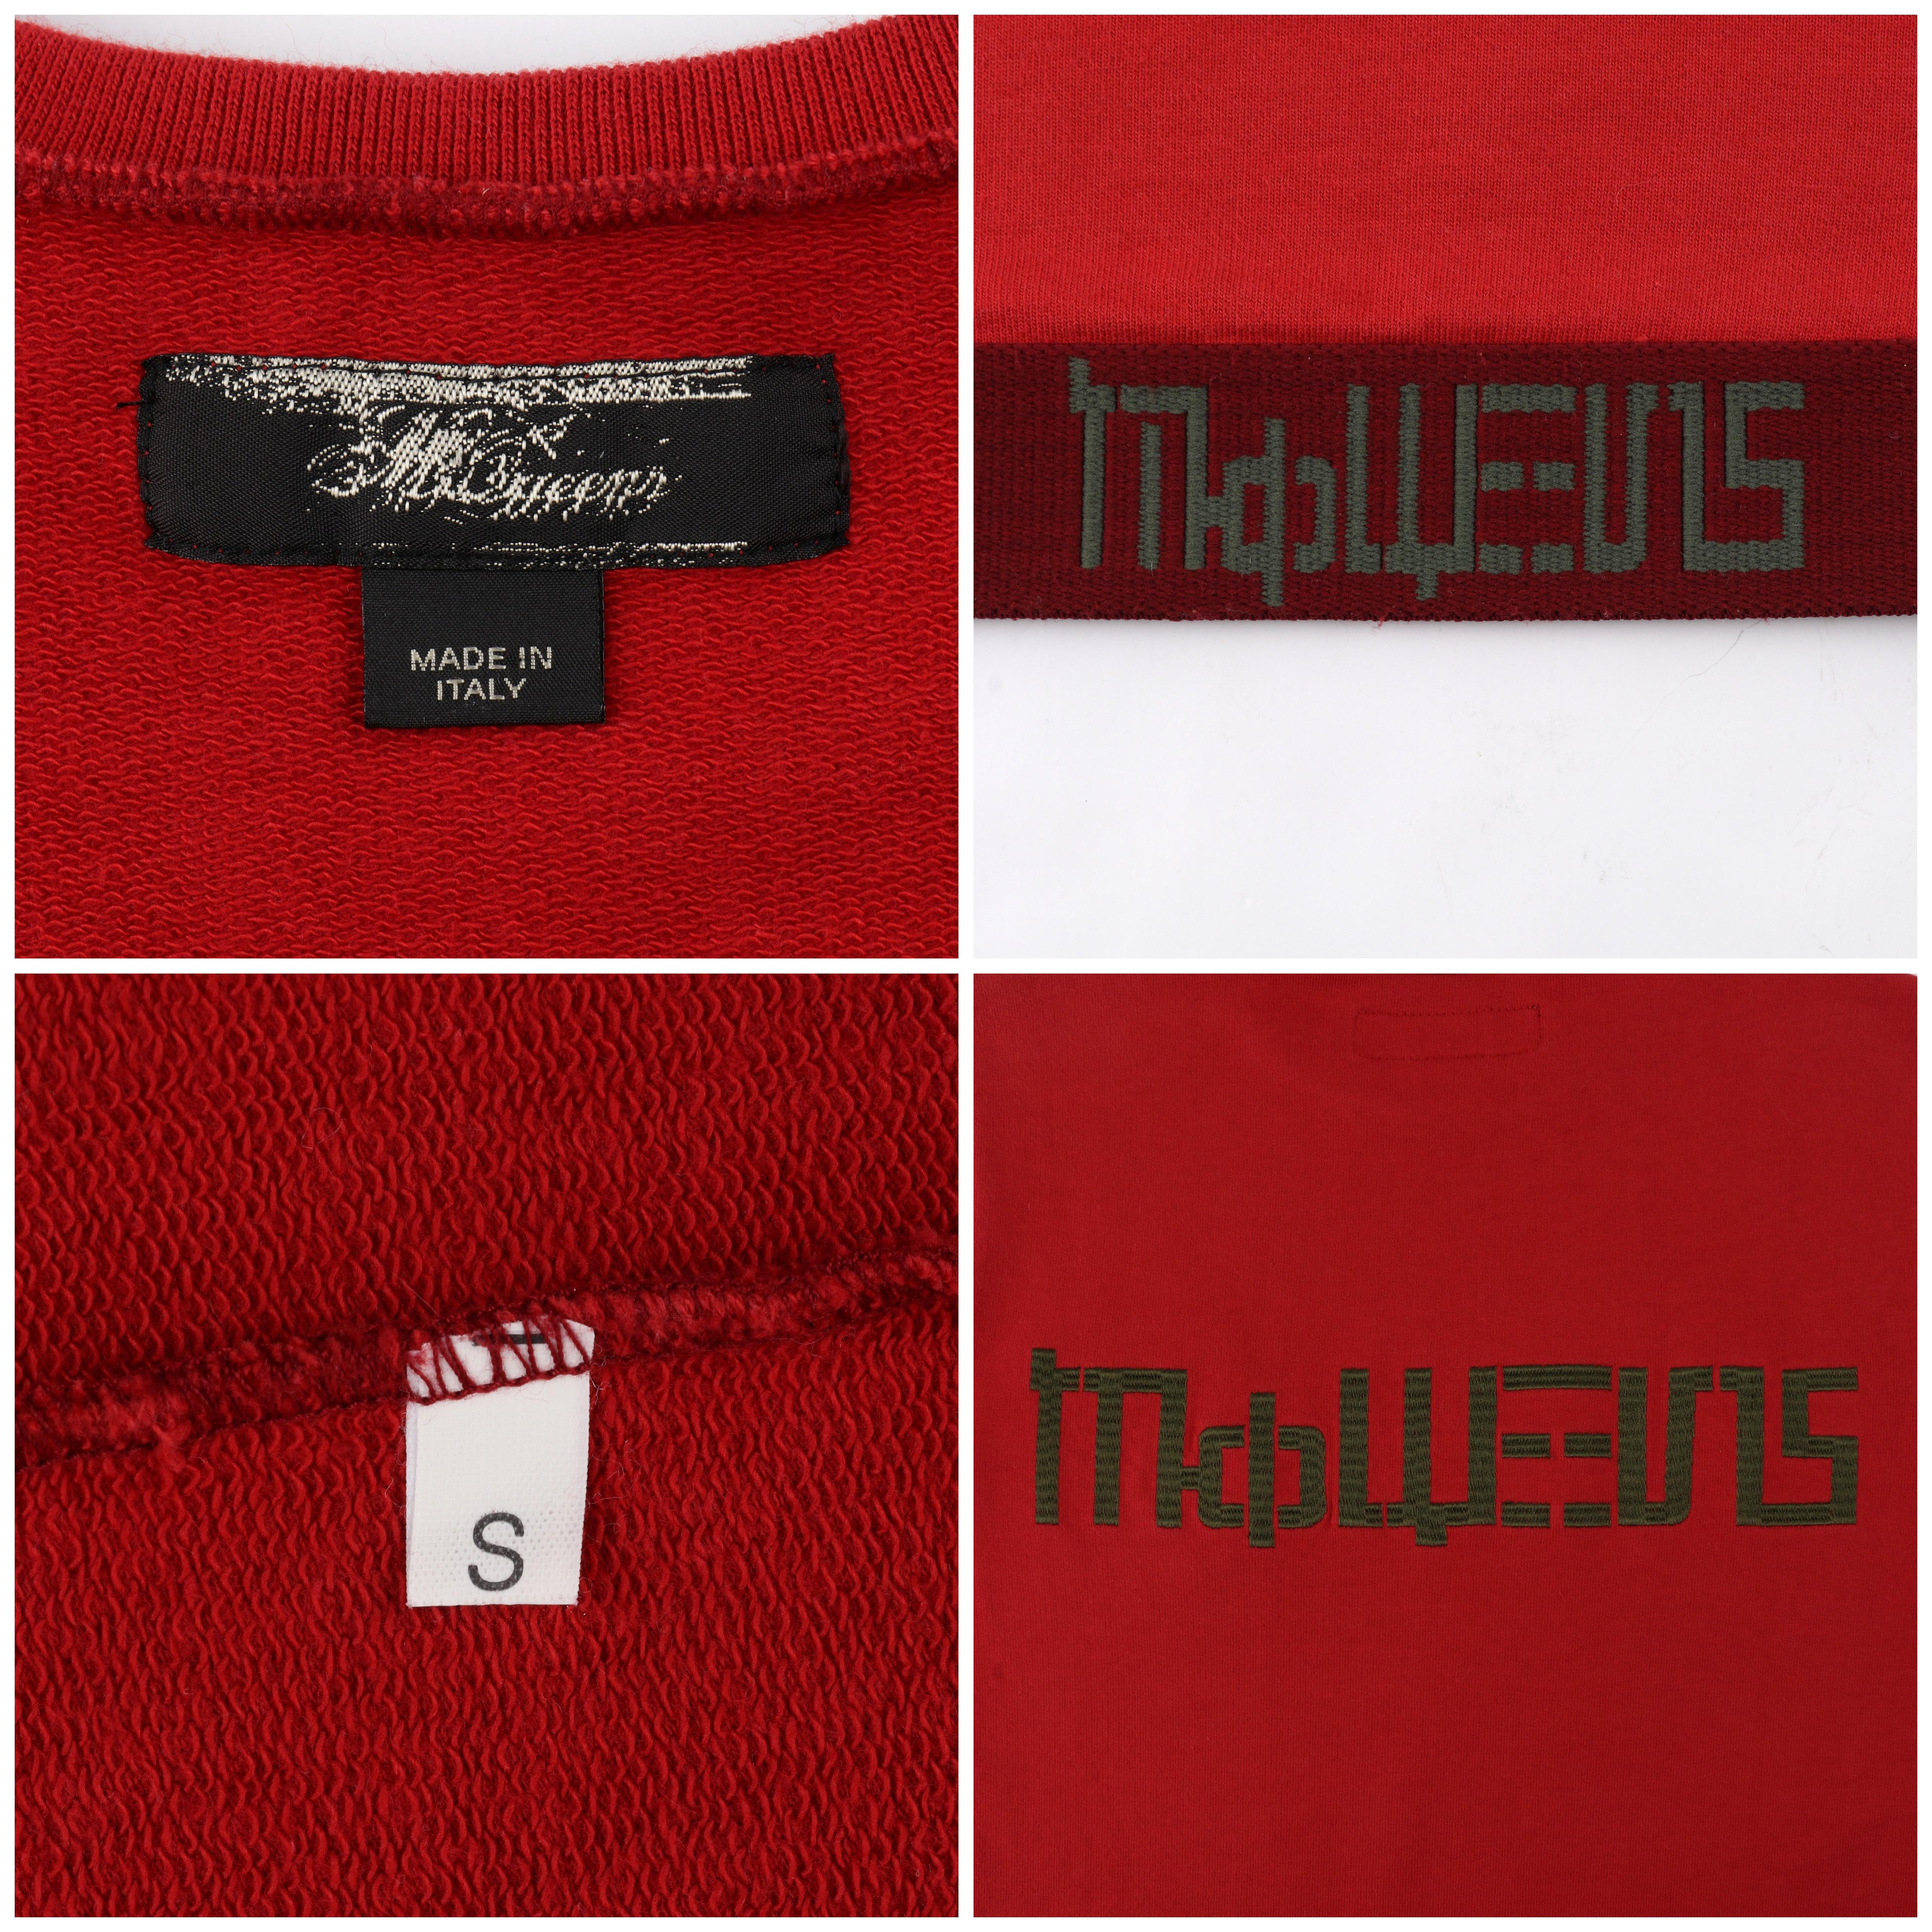 ALEXANDER McQUEEN S/S 2000 Red Cyrillic Pegasus Emblem LS Pullover Sweater Top For Sale 3